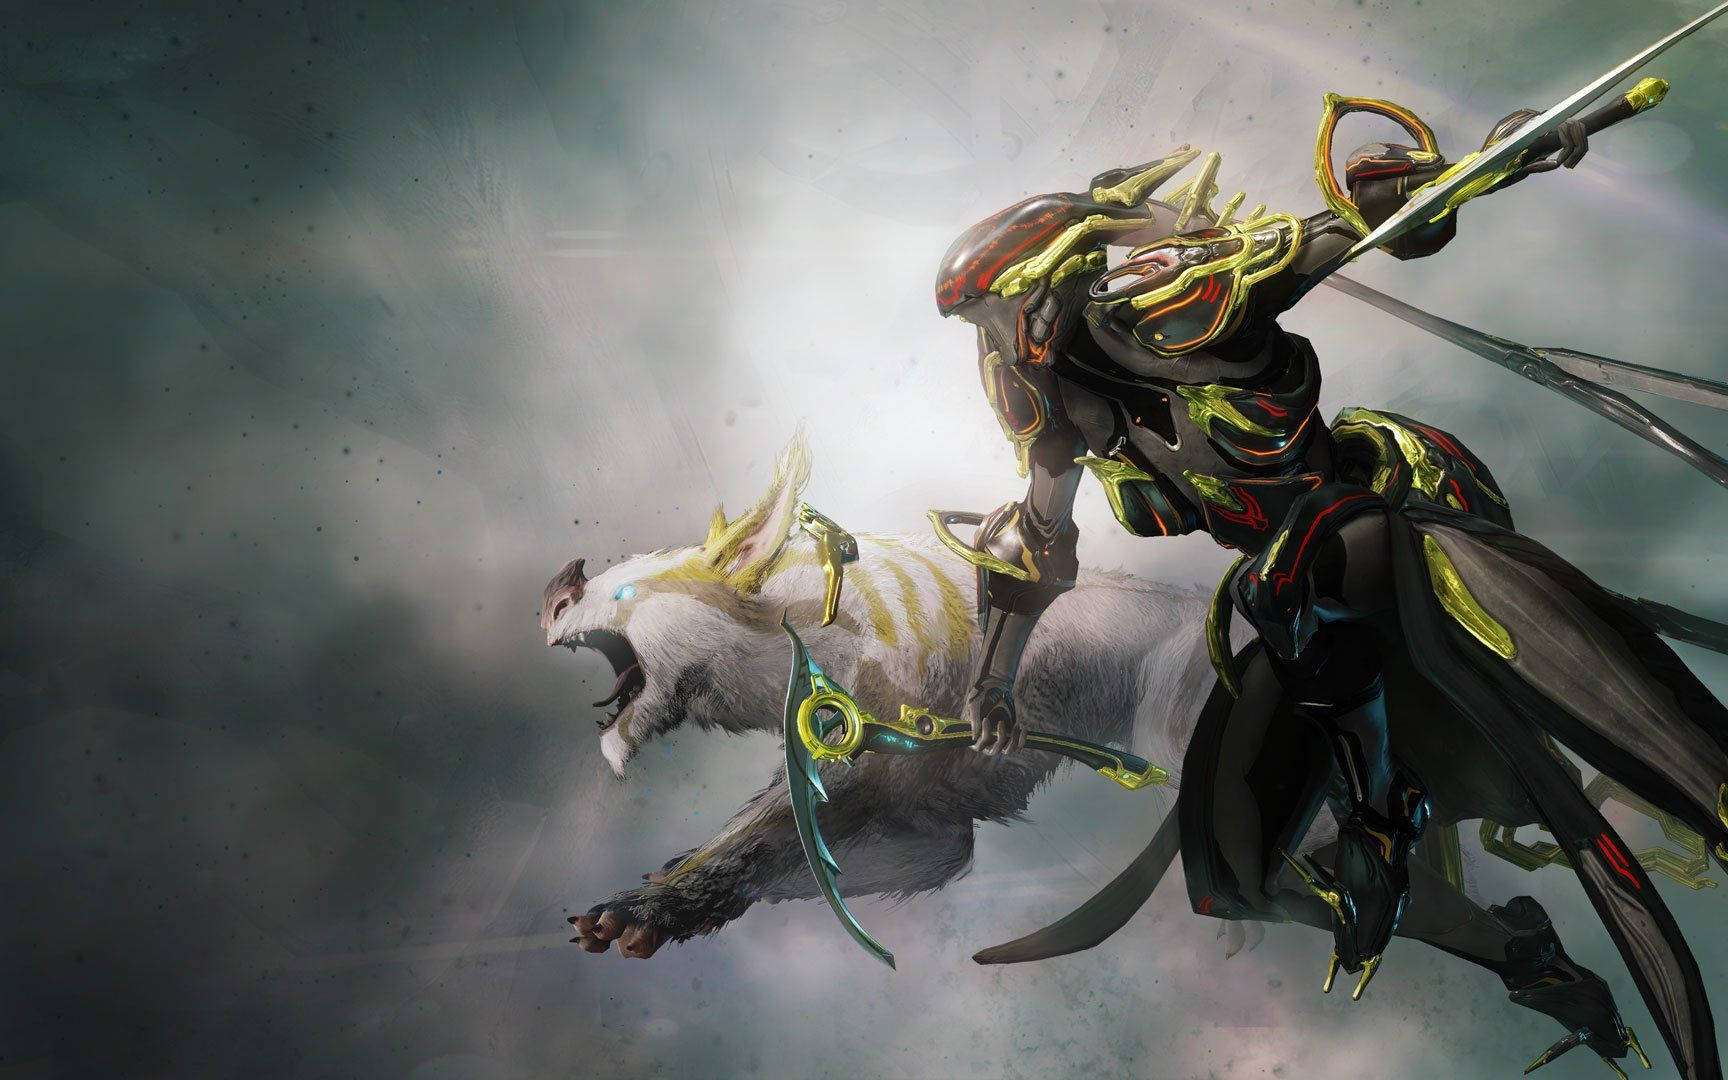 Warframe Tenno ancient soldier Titania with armored body and white furry sidekick wallpaper.